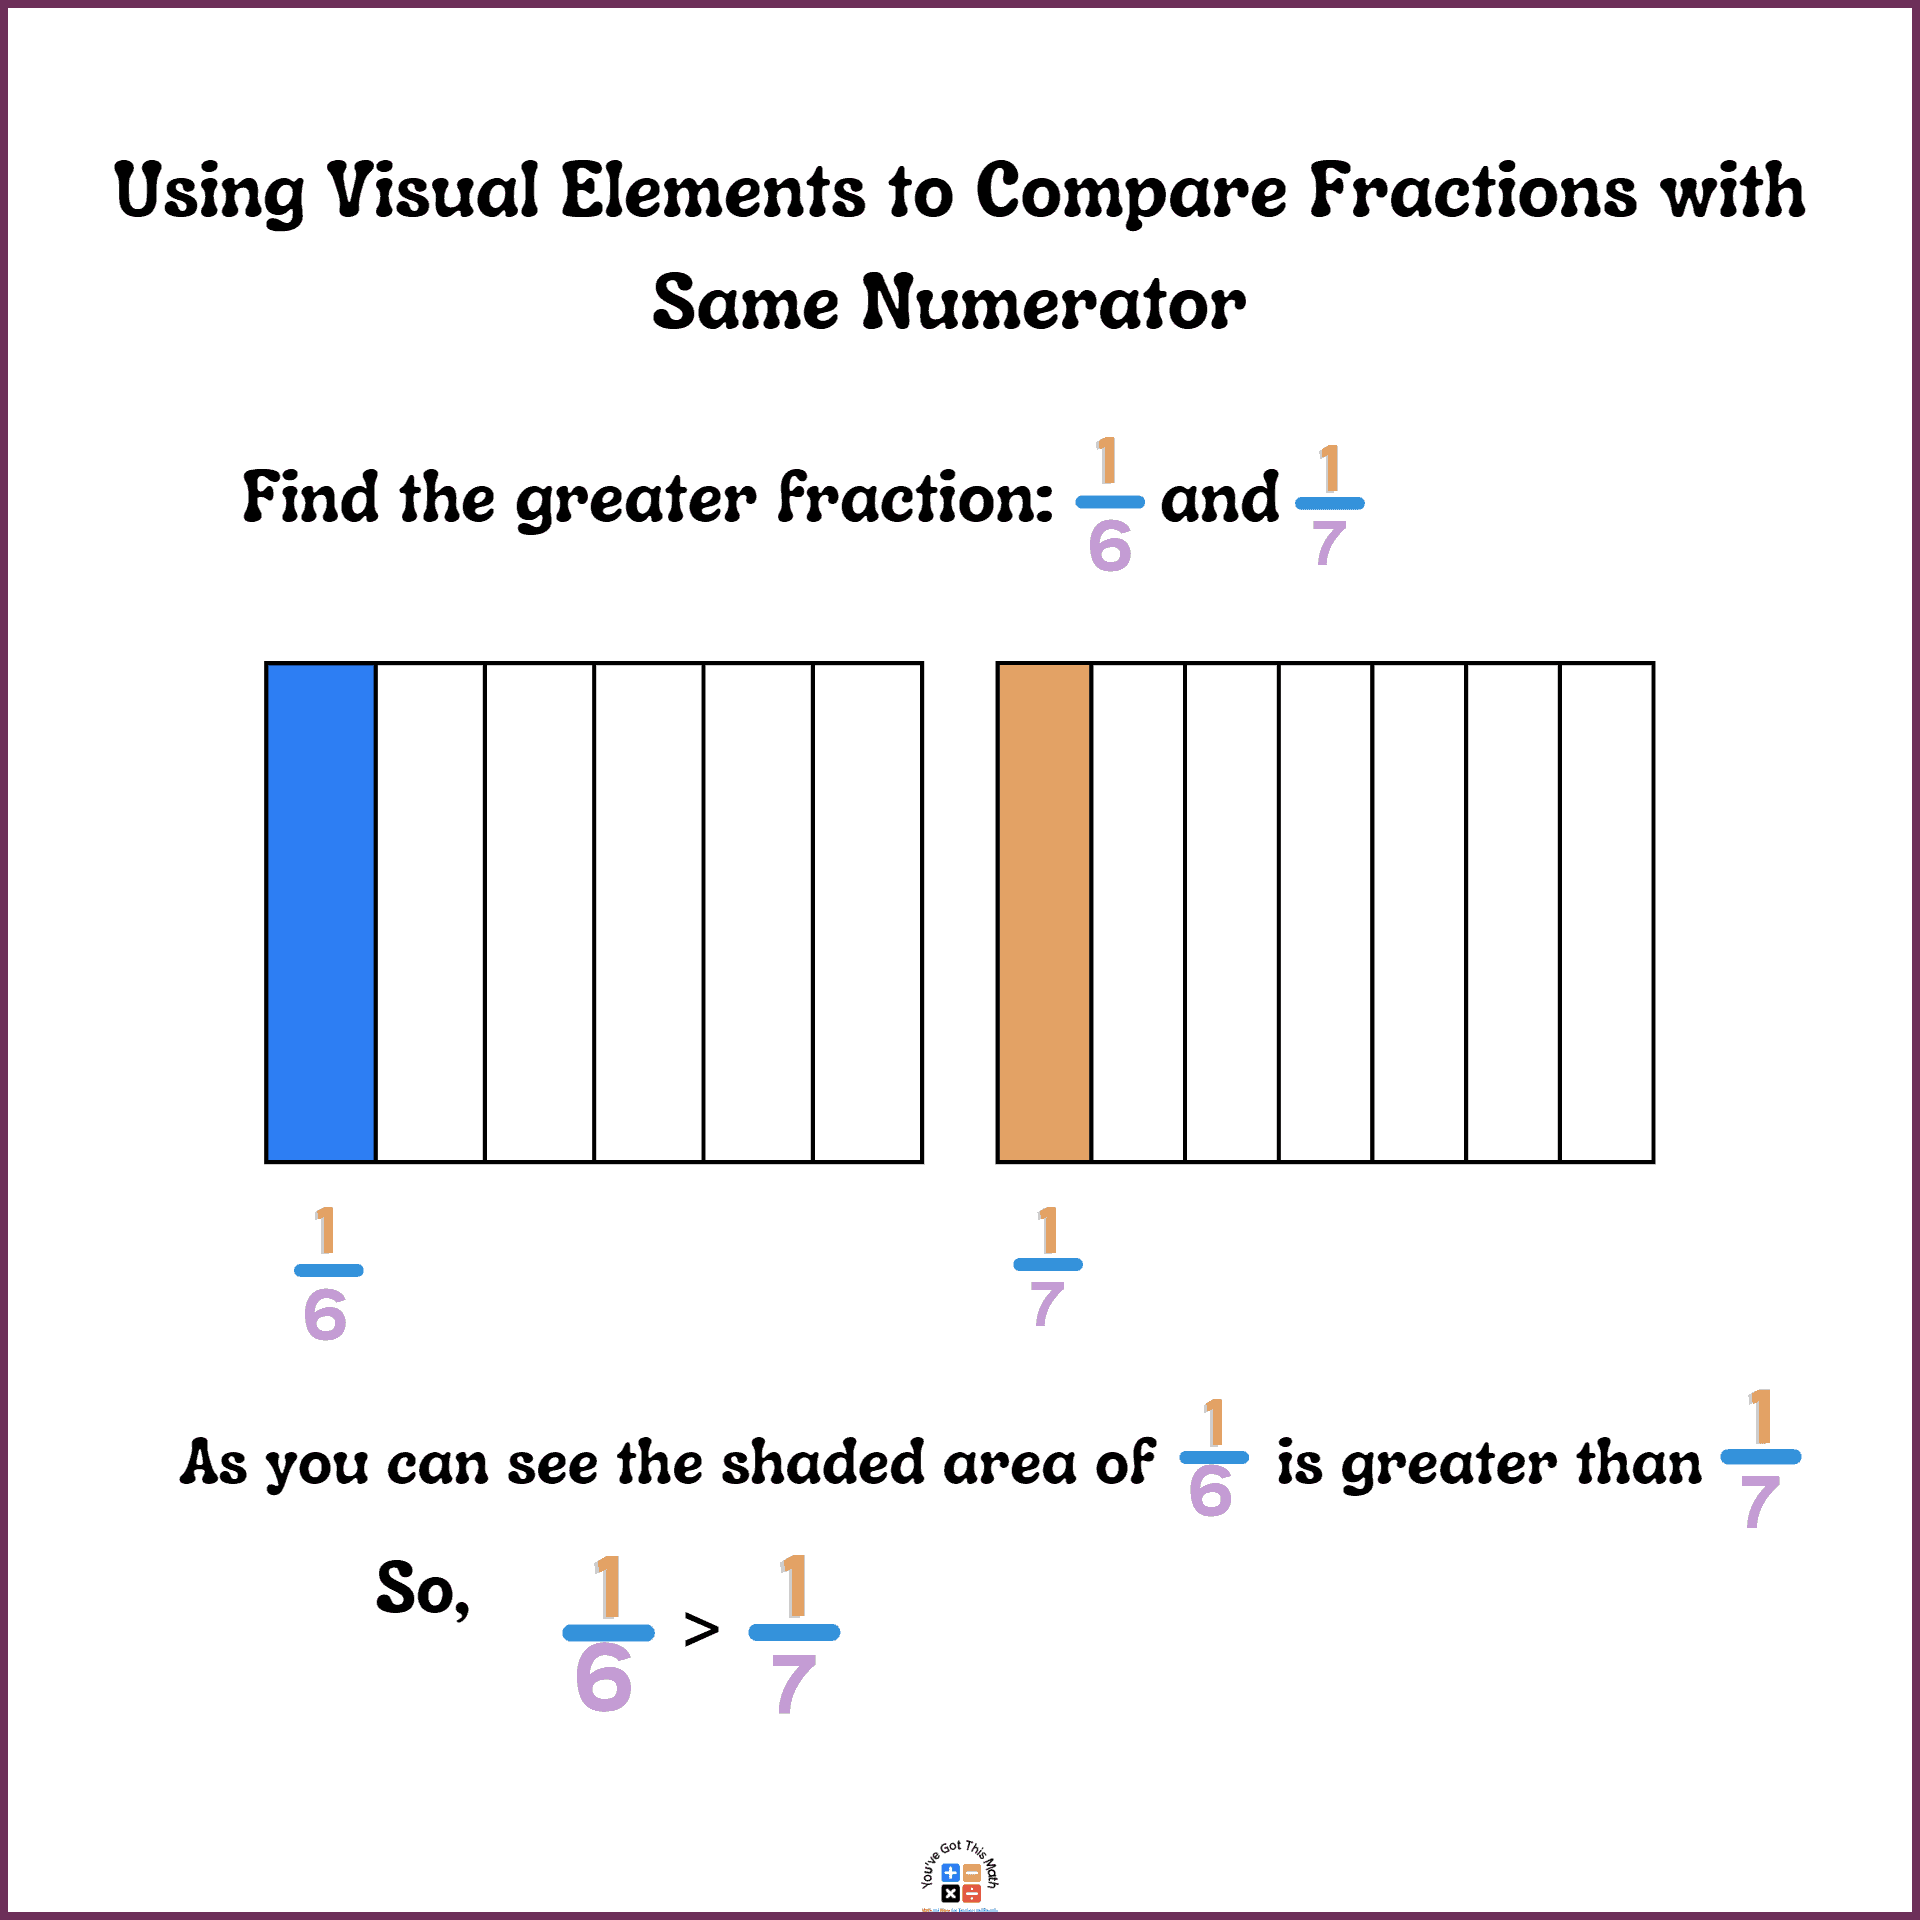 Different Elements to Compare Fractions with the Same Numerator 